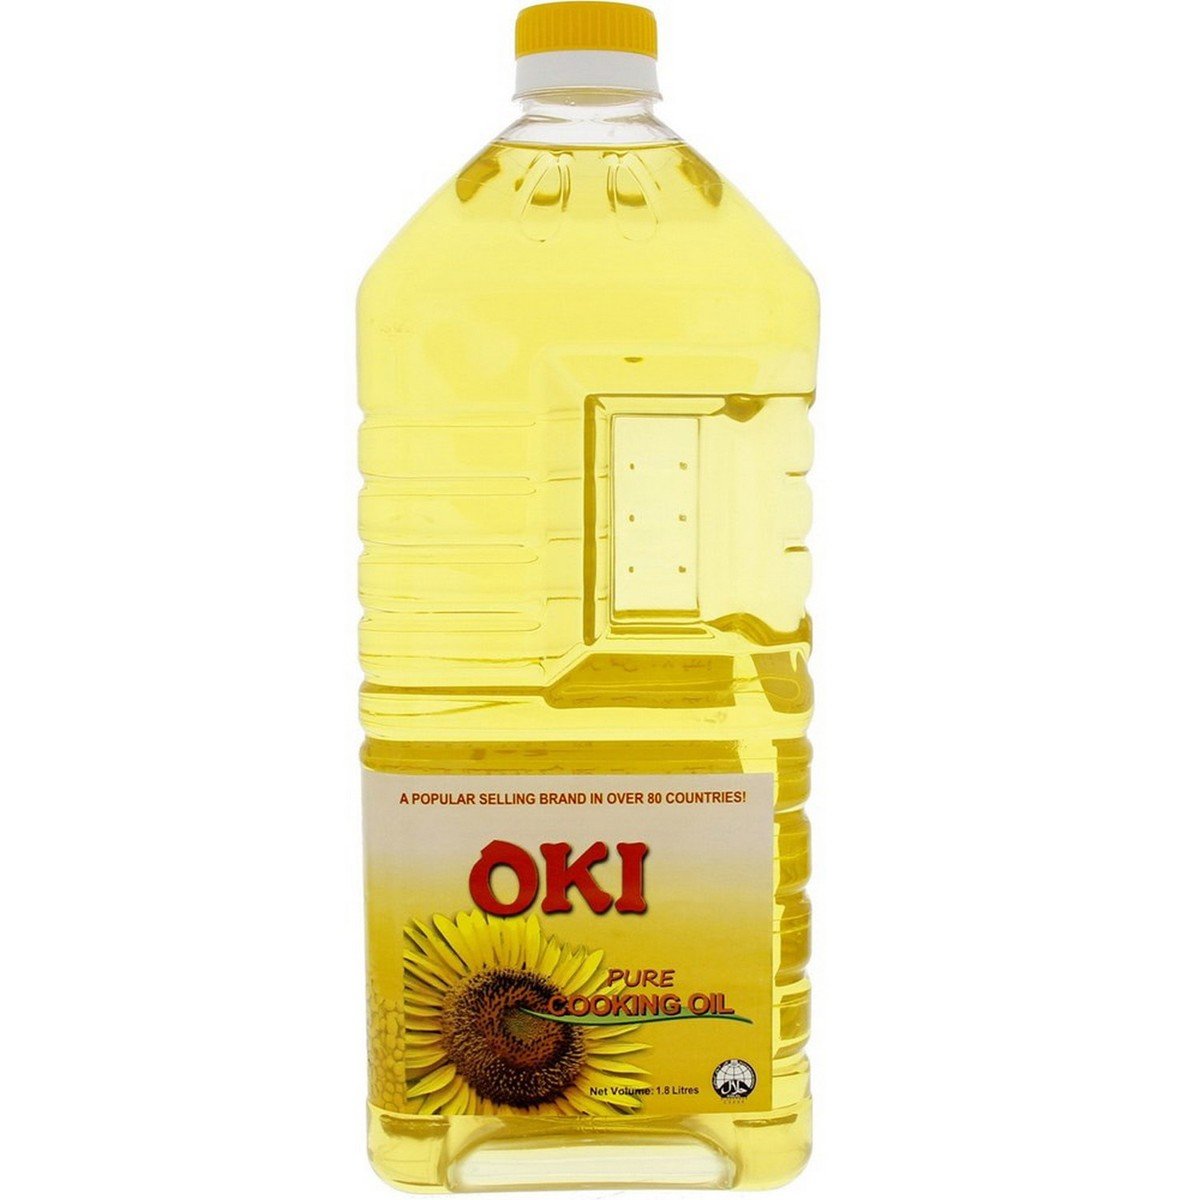 Oki Pure Cooking Oil 1.8 Litres